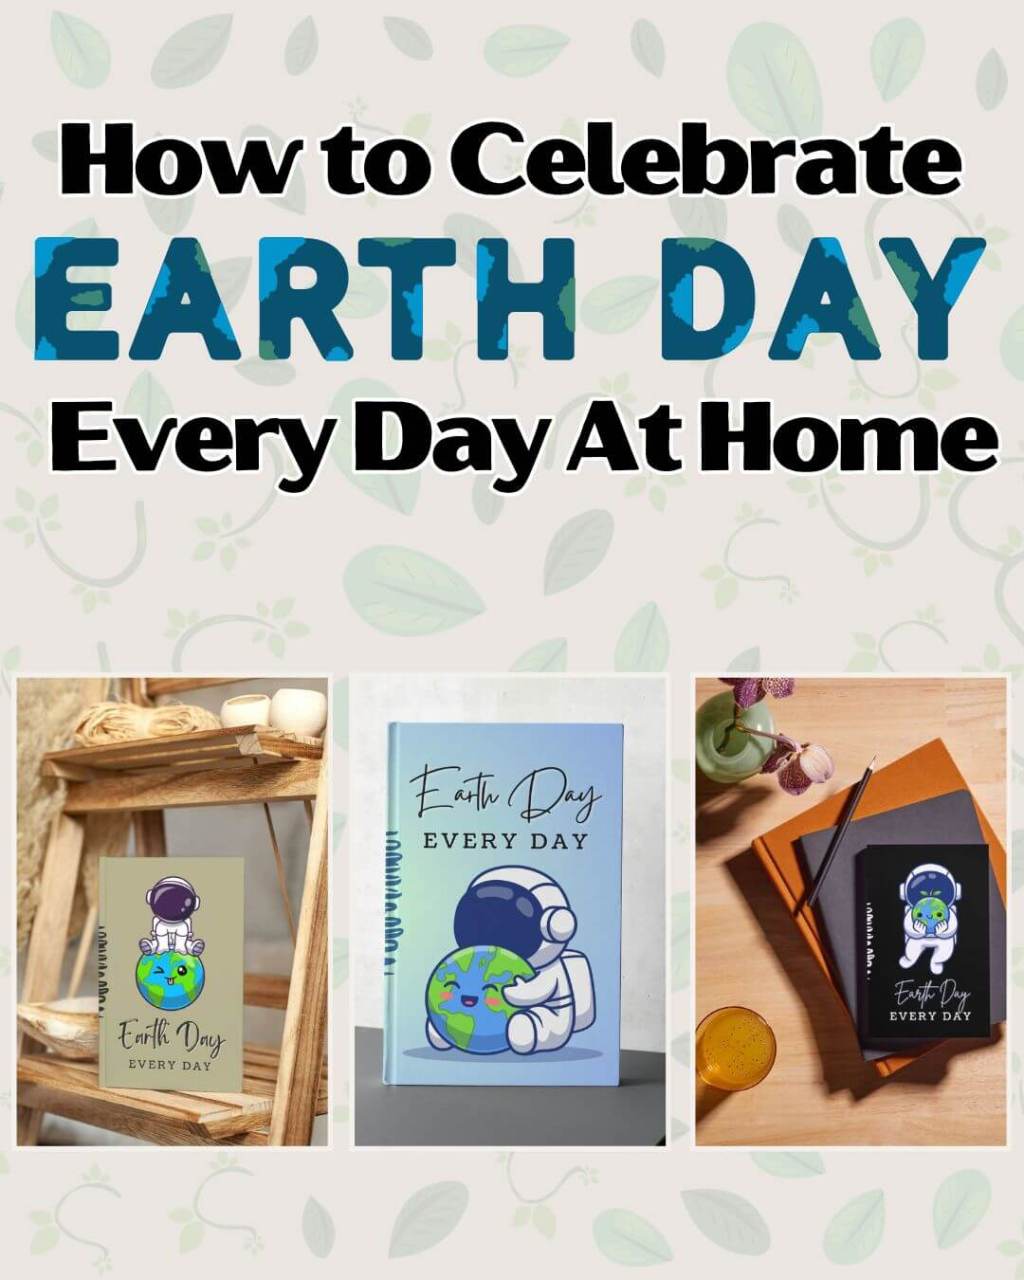 How to Celebrate Earth Day Every Day At Home